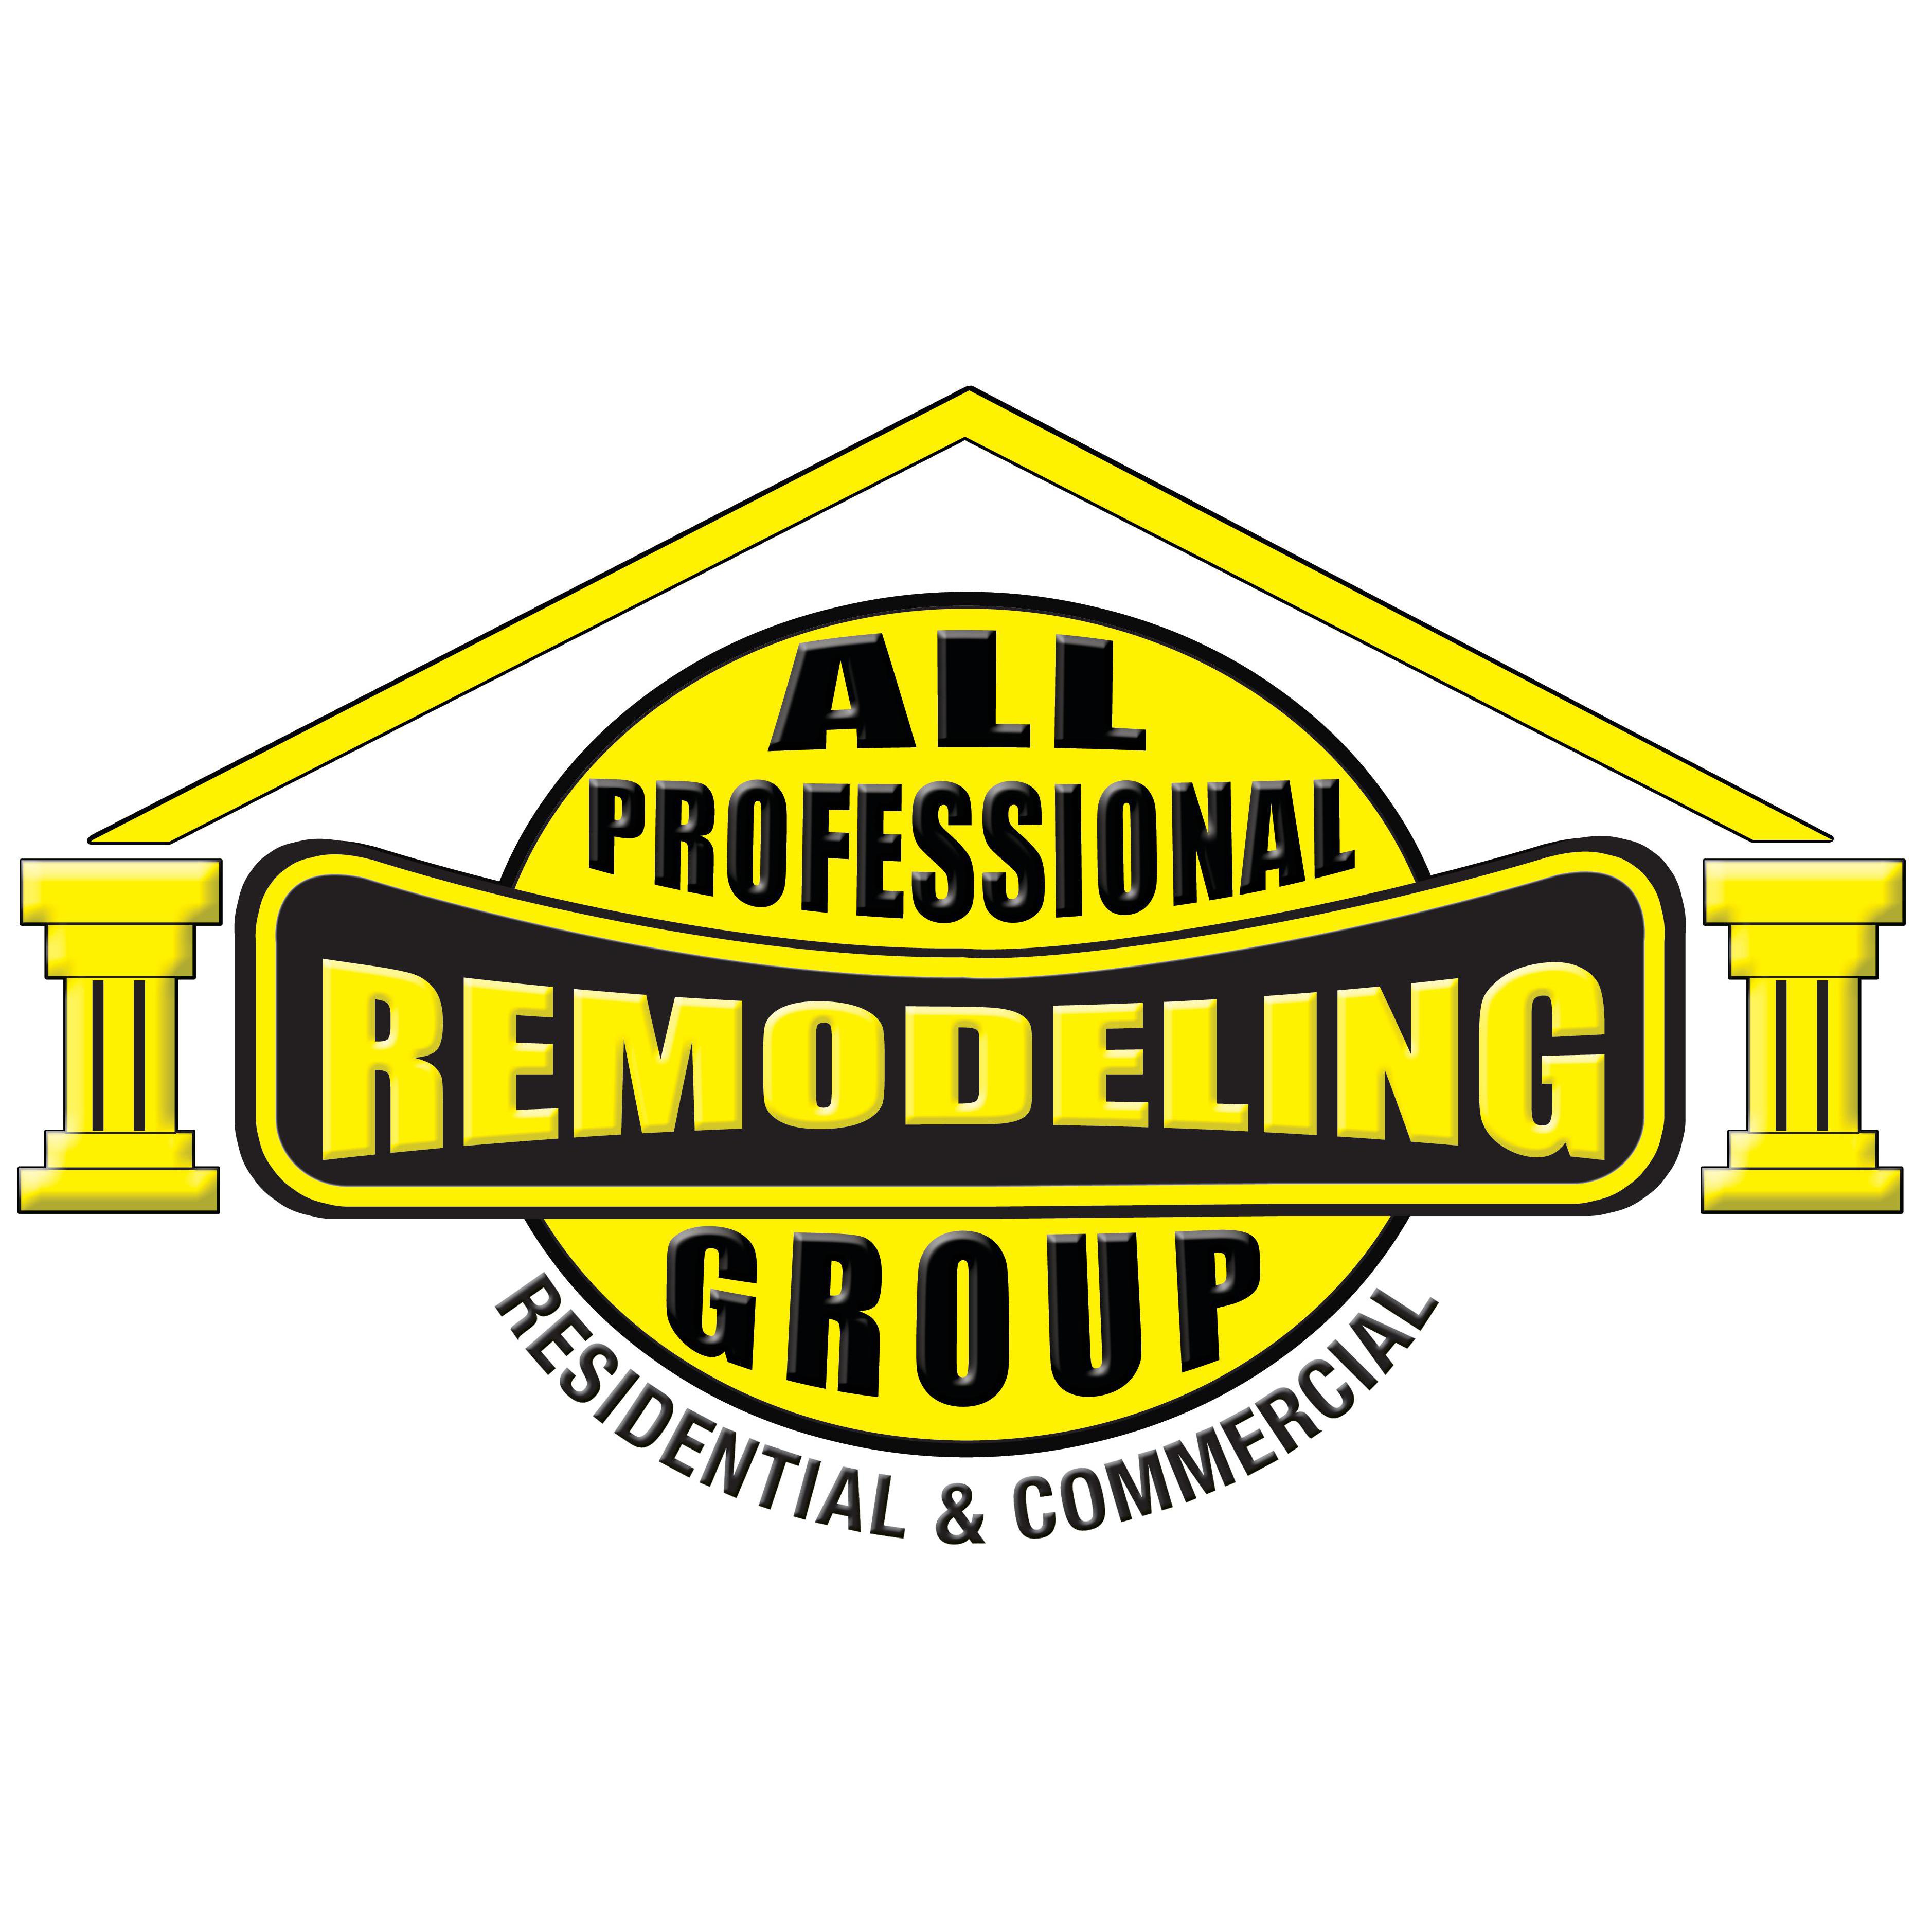 All Professional Remodeling Group, LLC